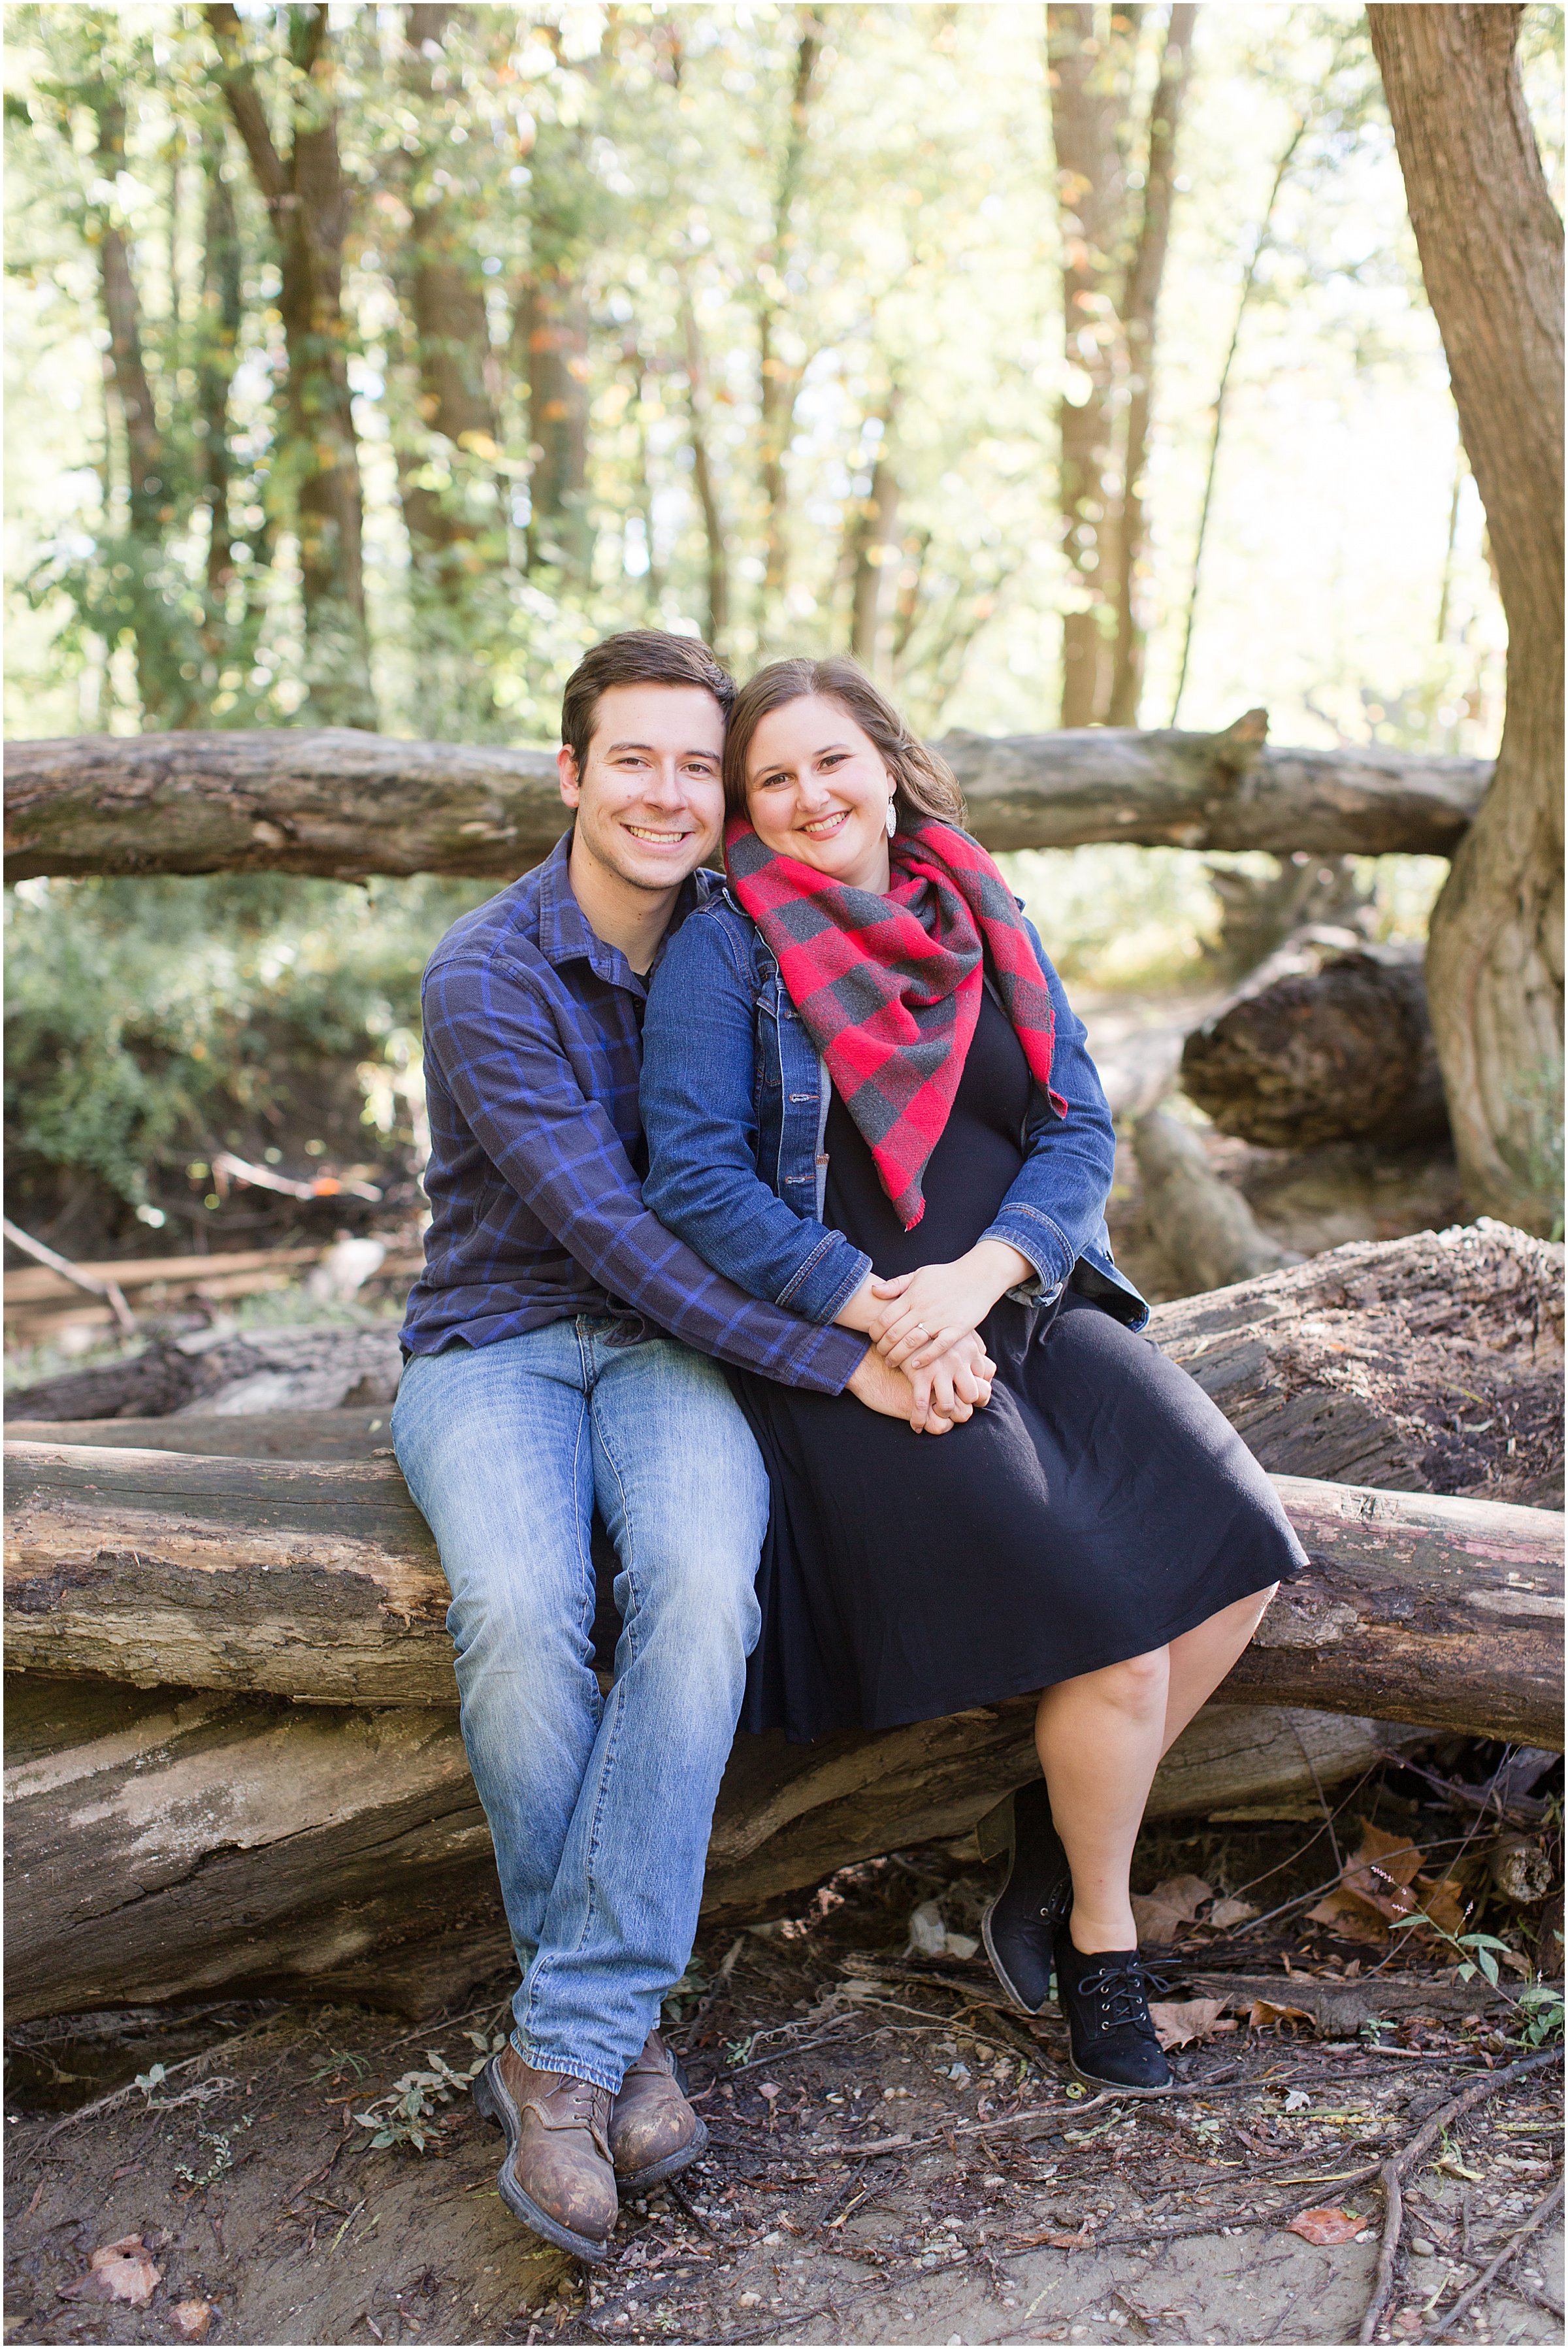 Holliday Park Engagement Session by Sami Renee_0016.jpg